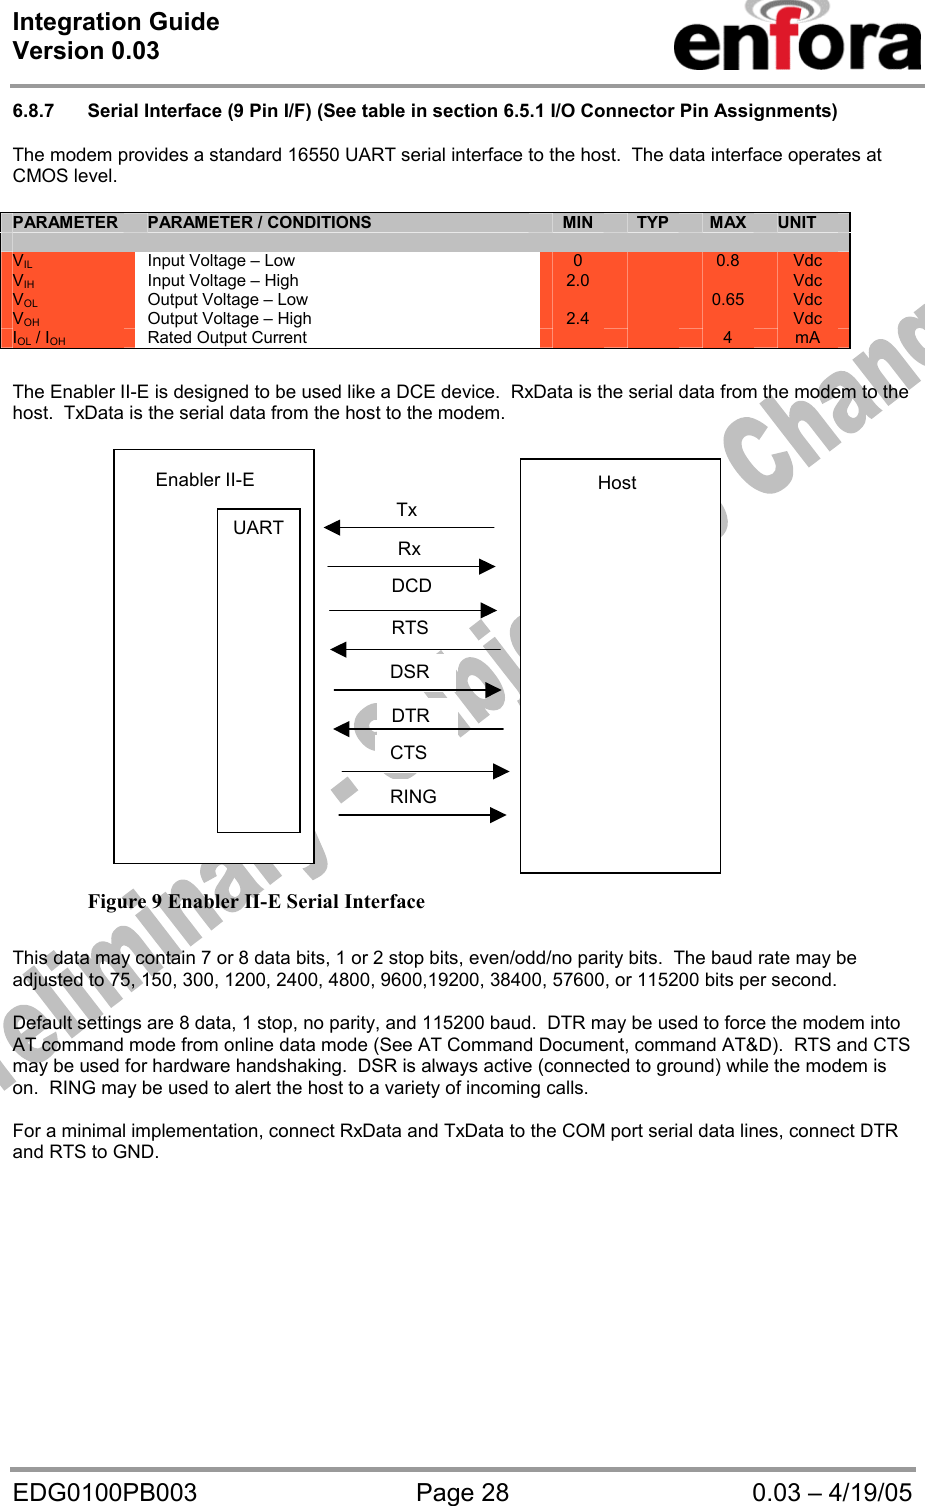 Integration Guide  Version 0.03   EDG0100PB003  Page 28  0.03 – 4/19/05 6.8.7  Serial Interface (9 Pin I/F) (See table in section 6.5.1 I/O Connector Pin Assignments)  The modem provides a standard 16550 UART serial interface to the host.  The data interface operates at CMOS level.            The Enabler II-E is designed to be used like a DCE device.  RxData is the serial data from the modem to the host.  TxData is the serial data from the host to the modem.                         Figure 9 Enabler II-E Serial Interface  This data may contain 7 or 8 data bits, 1 or 2 stop bits, even/odd/no parity bits.  The baud rate may be adjusted to 75, 150, 300, 1200, 2400, 4800, 9600,19200, 38400, 57600, or 115200 bits per second.  Default settings are 8 data, 1 stop, no parity, and 115200 baud.  DTR may be used to force the modem into AT command mode from online data mode (See AT Command Document, command AT&amp;D).  RTS and CTS may be used for hardware handshaking.  DSR is always active (connected to ground) while the modem is on.  RING may be used to alert the host to a variety of incoming calls.  For a minimal implementation, connect RxData and TxData to the COM port serial data lines, connect DTR and RTS to GND.  PARAMETER PARAMETER / CONDITIONS MIN  TYP  MAX  UNIT  VIL Input Voltage – Low  0   0.8  Vdc VIH Input Voltage – High  2.0      Vdc VOL  Output Voltage – Low      0.65  Vdc VOH  Output Voltage – High  2.4      Vdc IOL / IOH Rated Output Current      4  mA RINGCTS DTR DSR RTS RxTxEnabler II-E UART DCD Host 